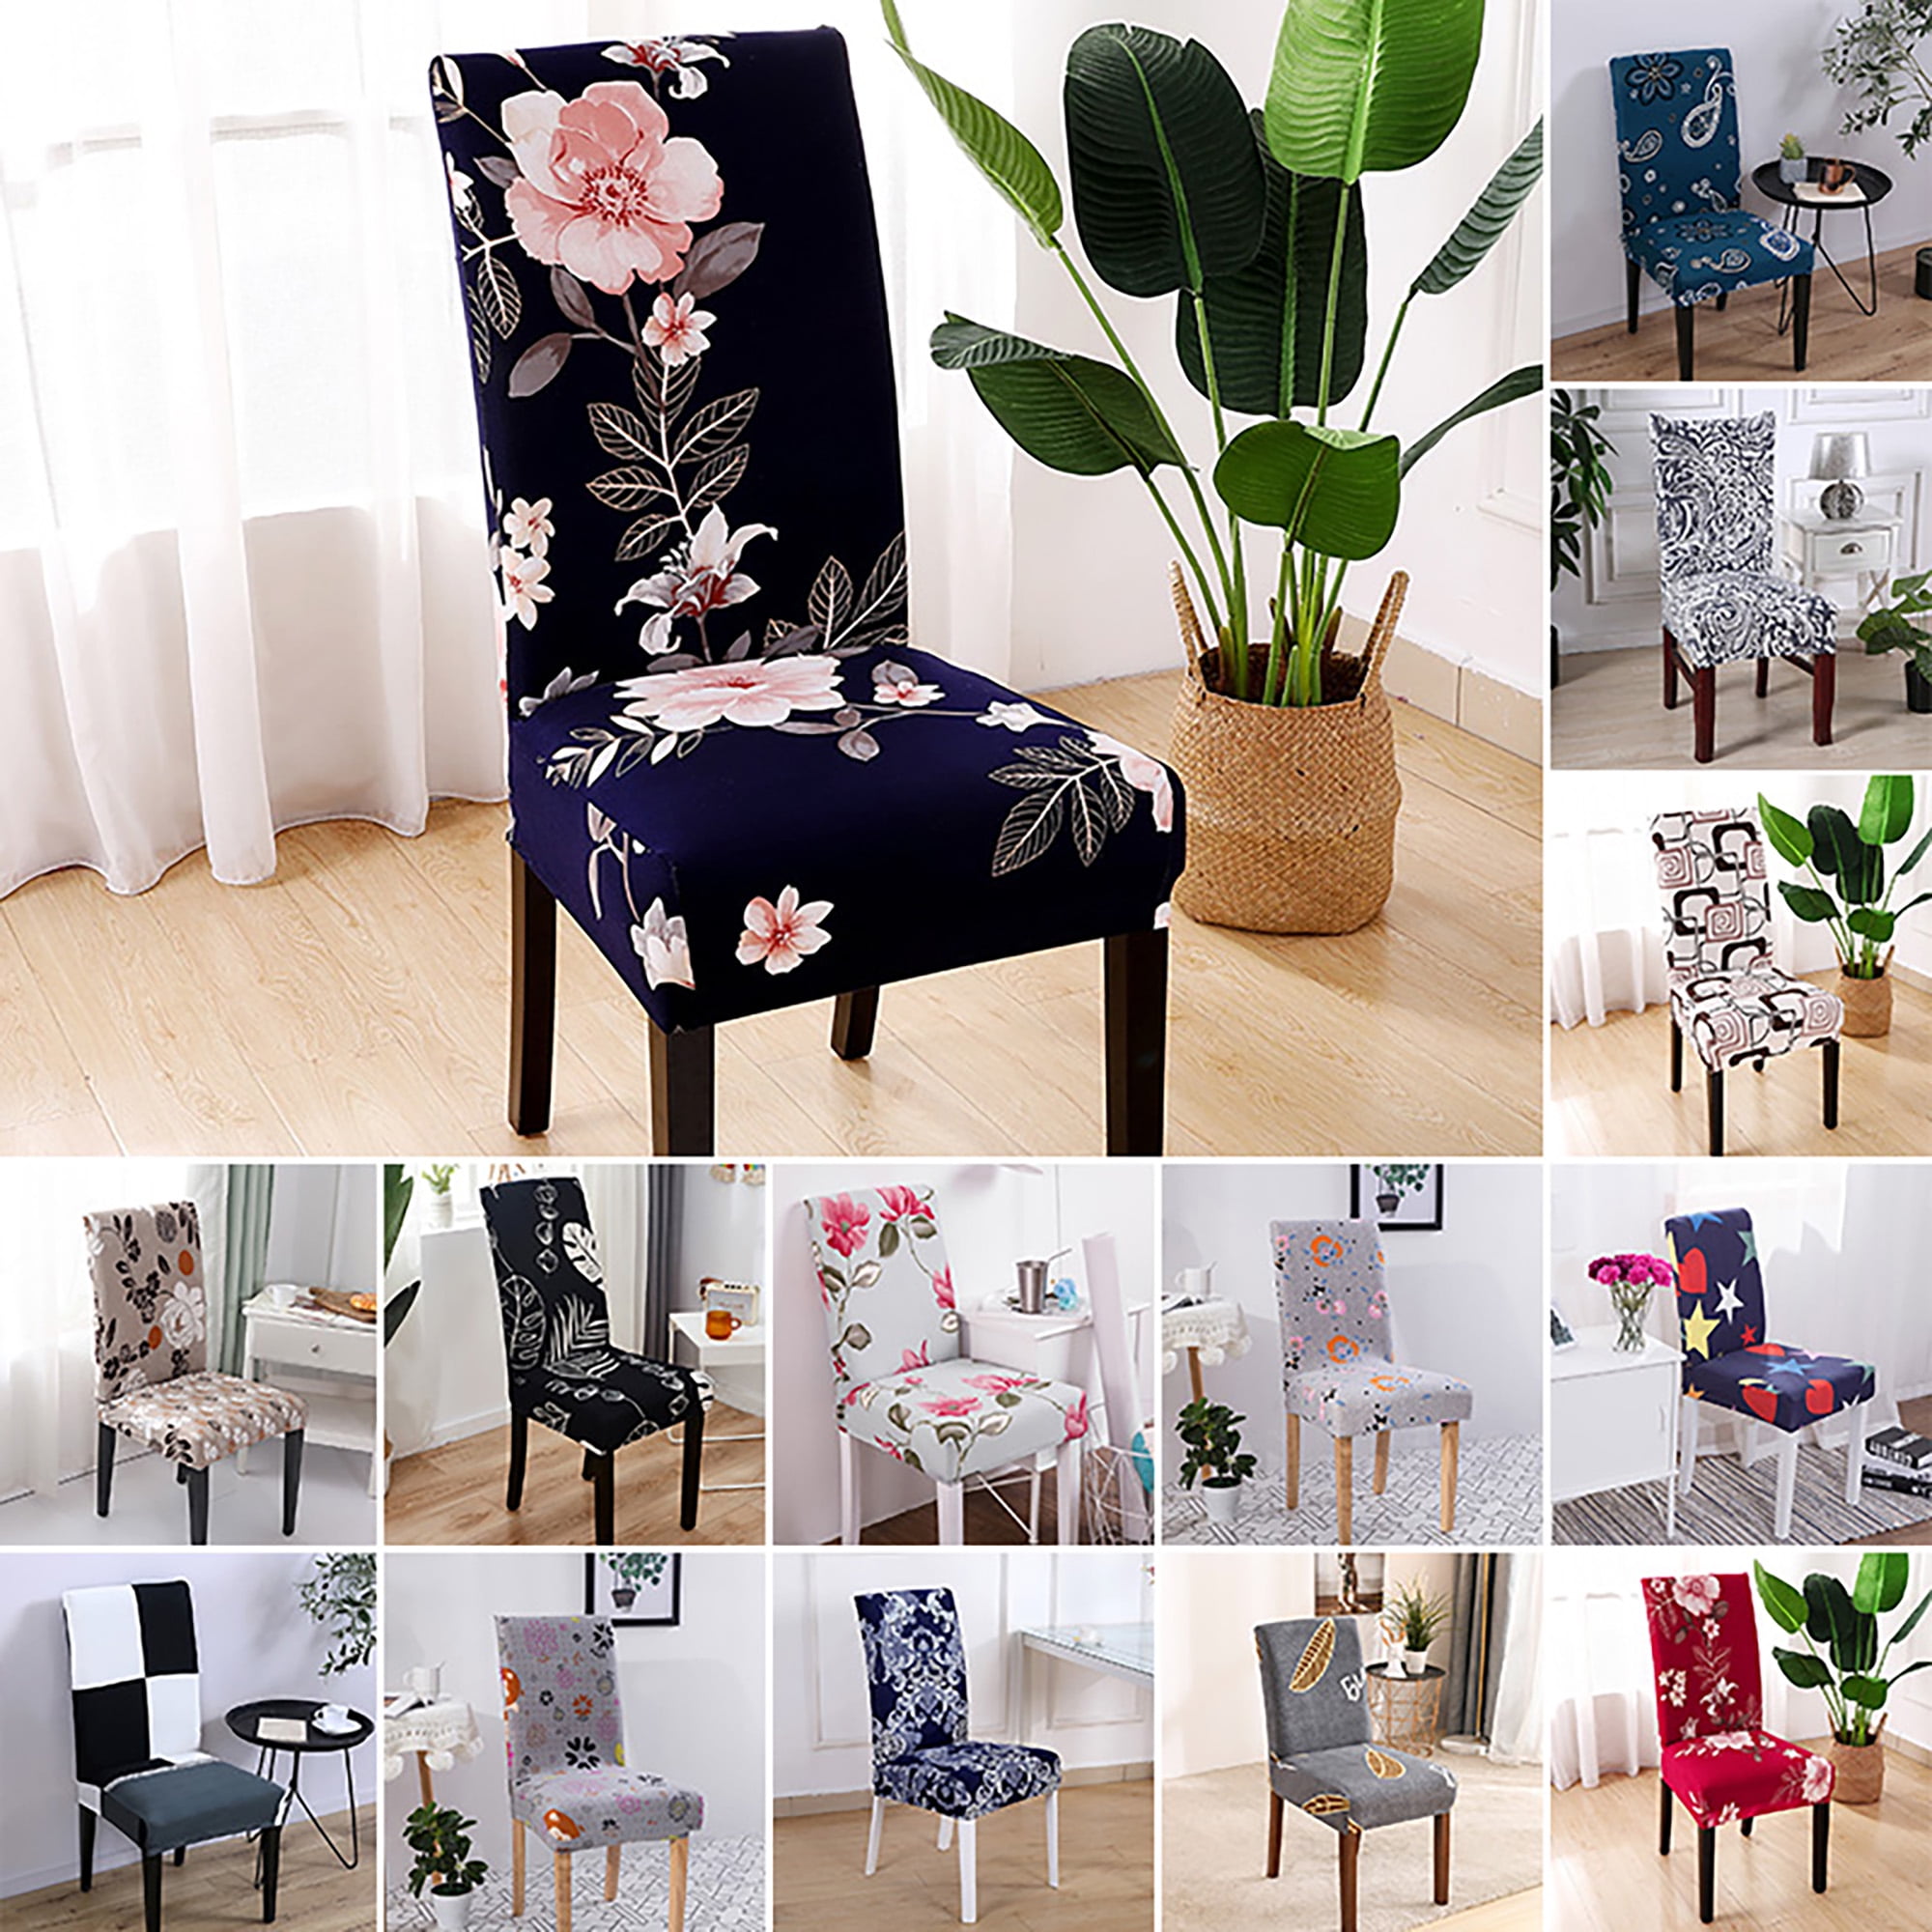 Details about   Dining Chair Cover Stretch Removable Slipcover Home Chair Protector Decor Hotel 